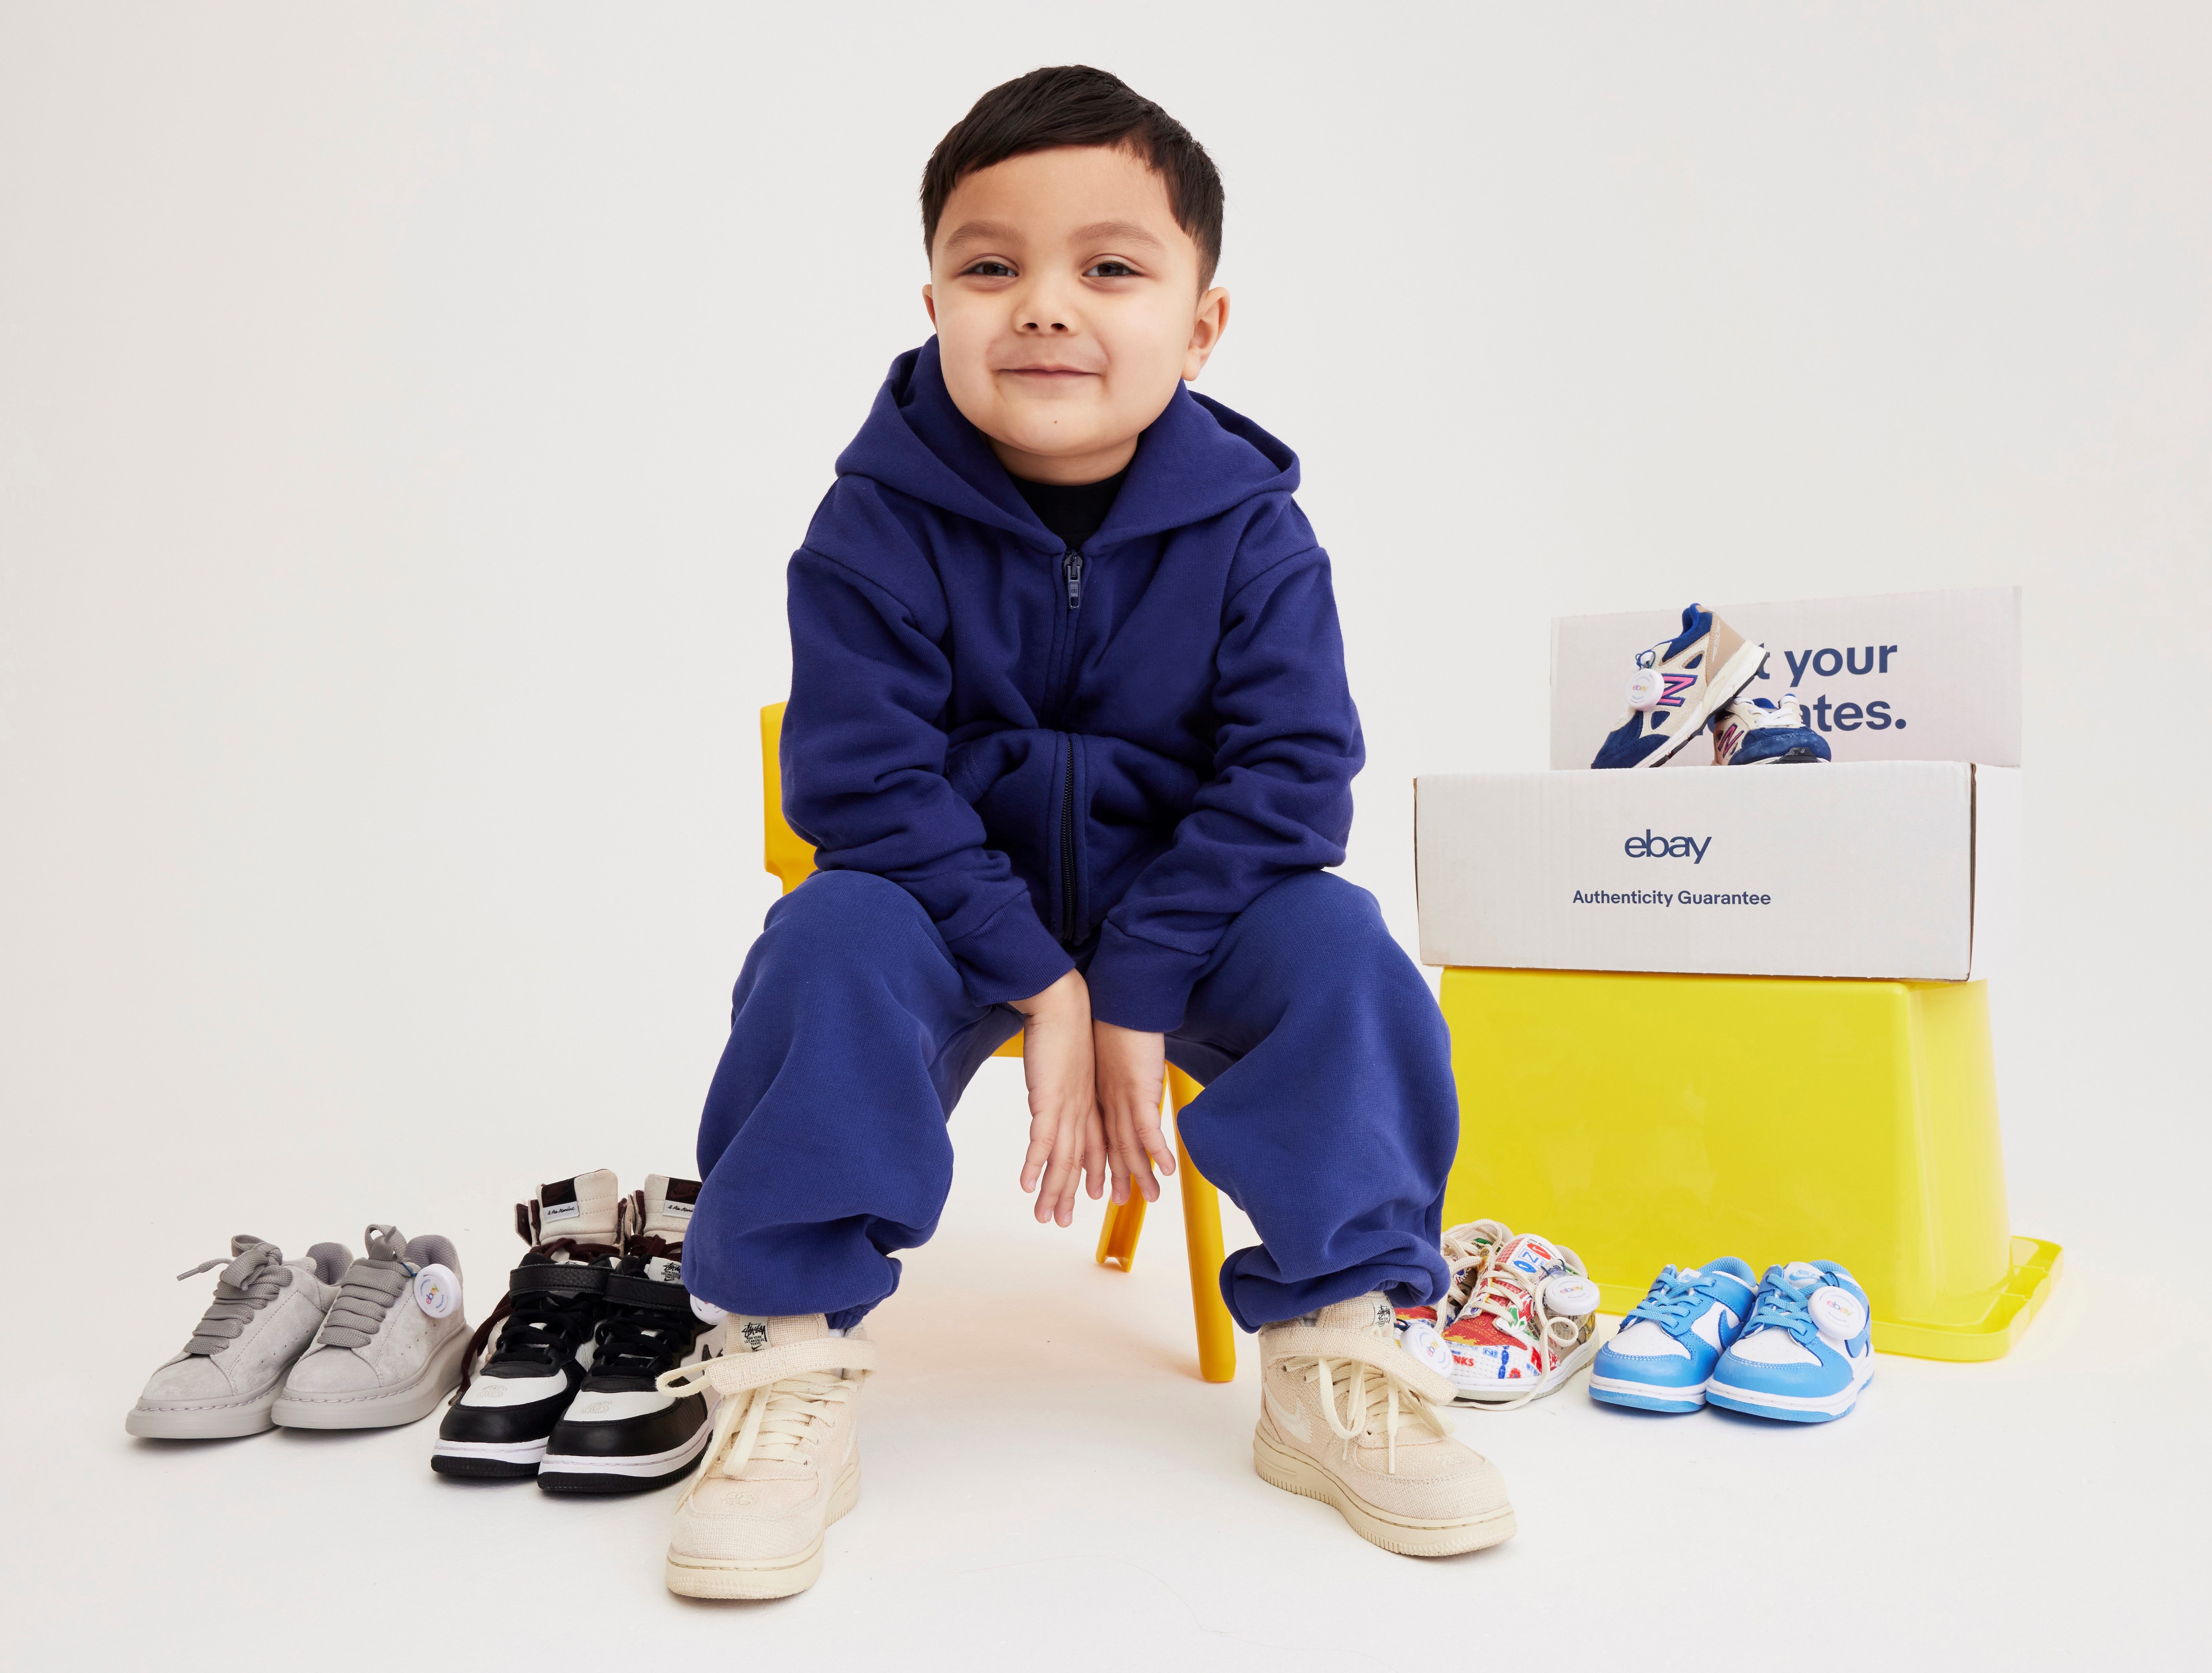 Introducing Authenticity Guarantee for kids' sneakers